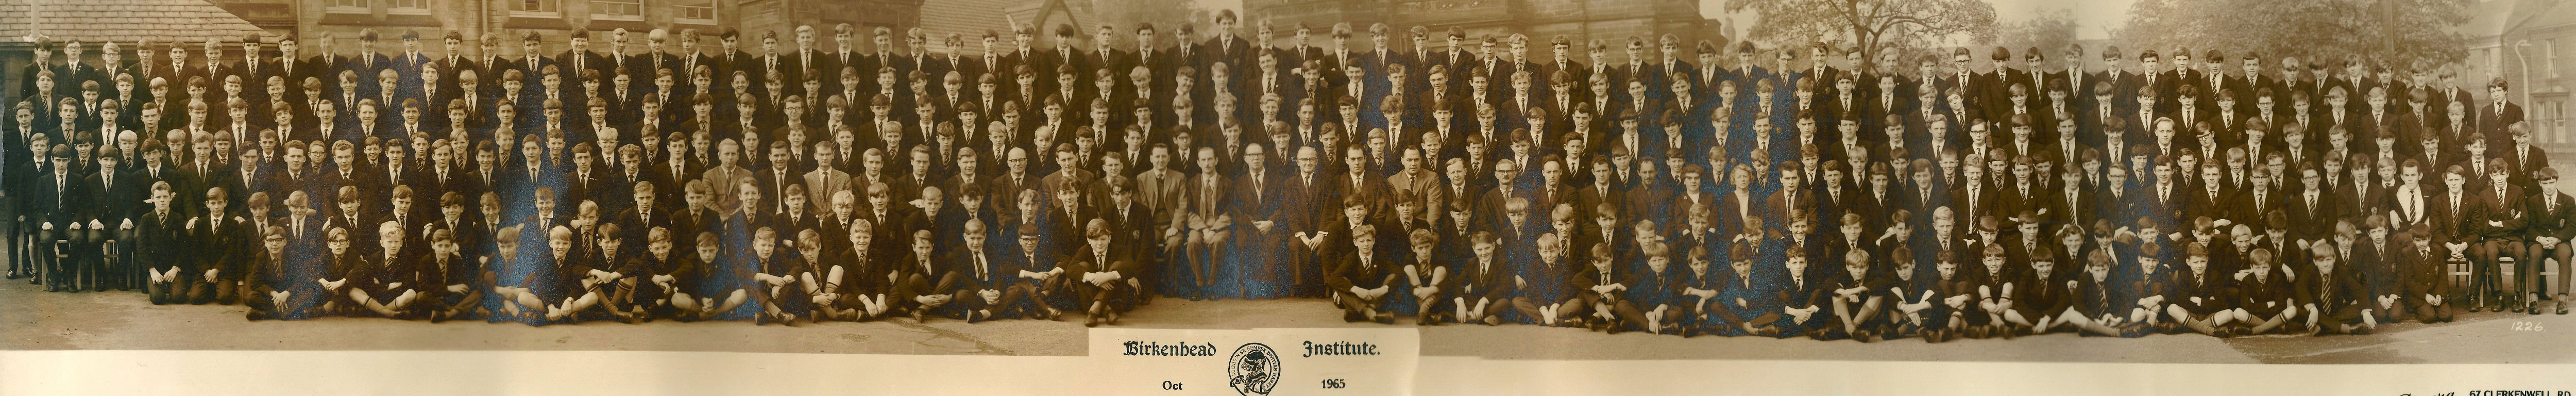 Whole School Photograph - October 1965